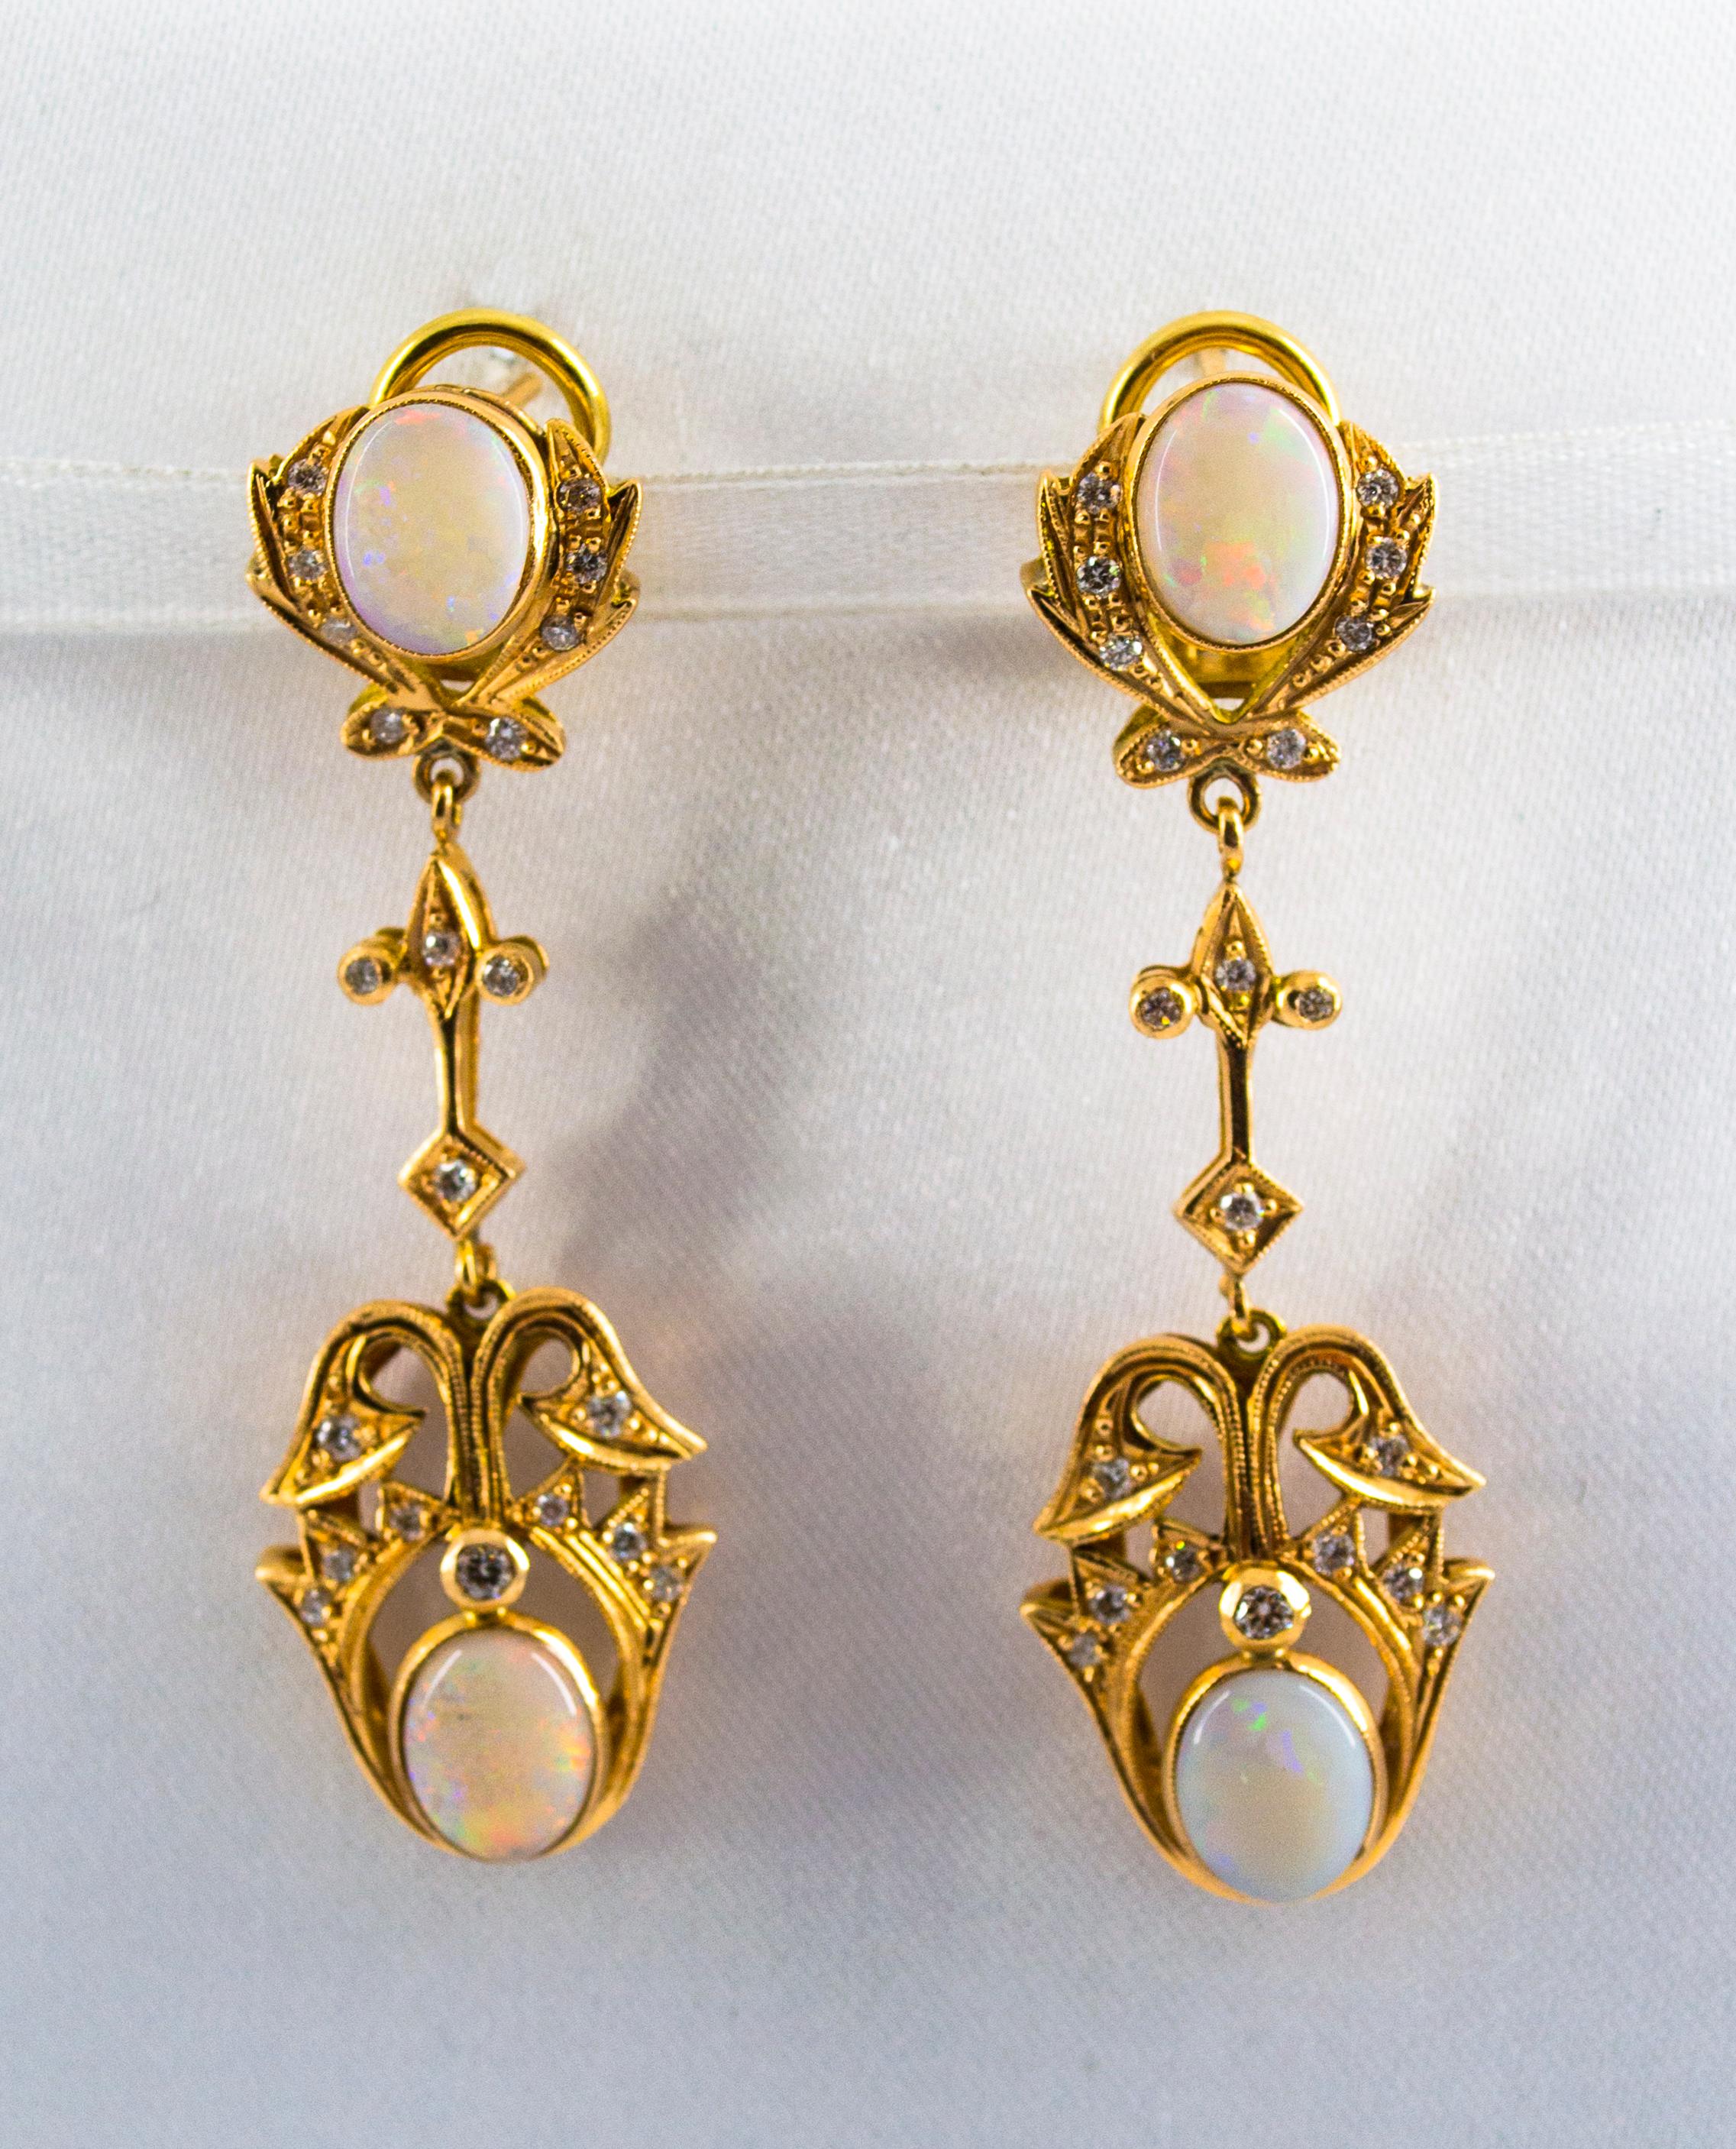 These Earrings are made of 14K Yellow Gold.
These Earrings have 0.90 Carats of White Diamonds.
These Earrings have 3.90 Carats of Opals.
All our Earrings have pins for pierced ears but we can change the closure and make any of our Earrings suitable